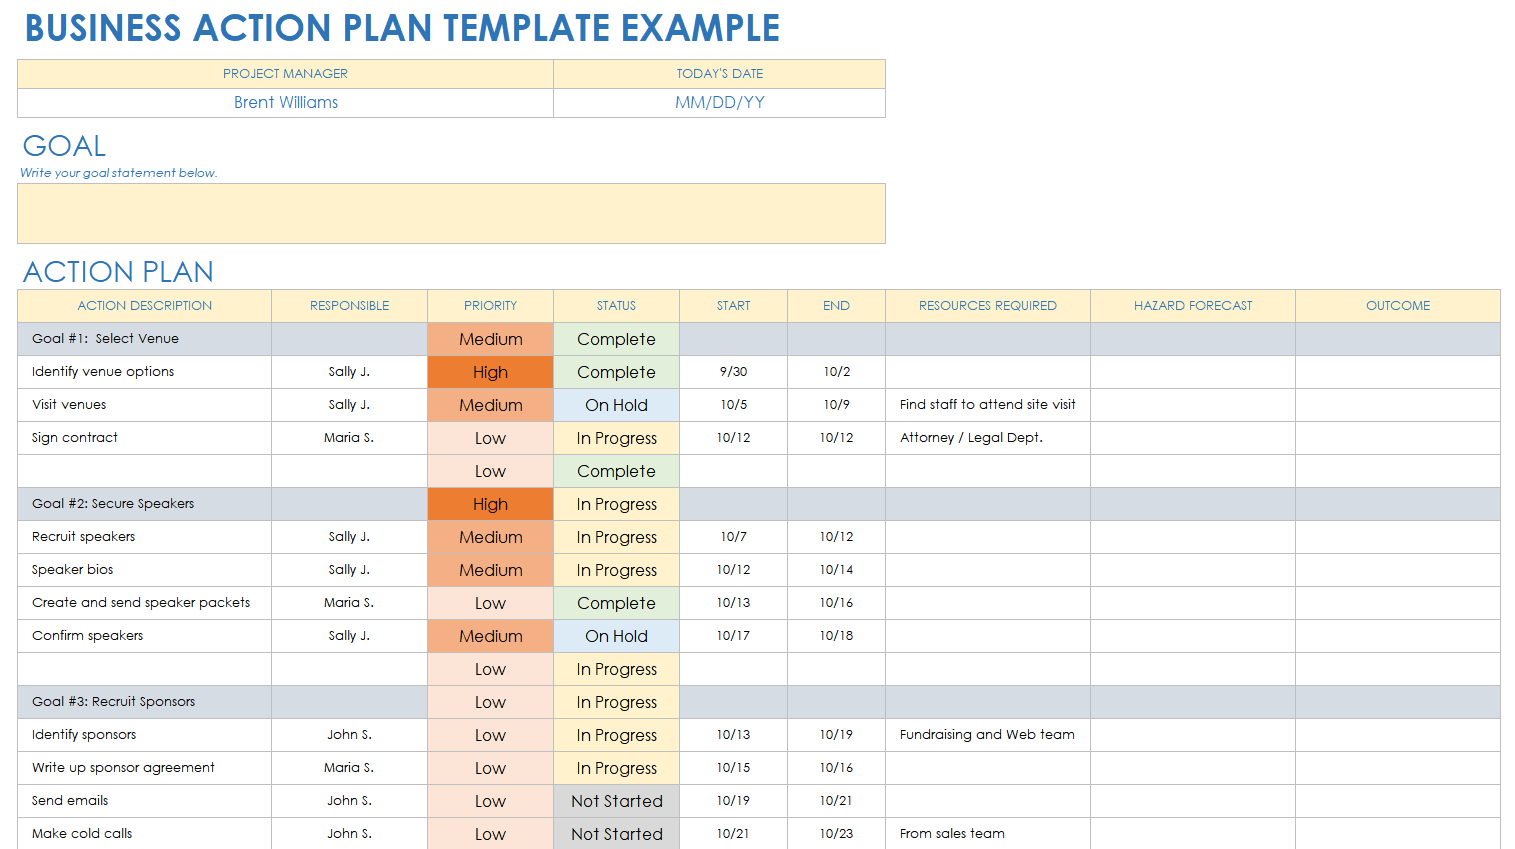 Business Action Plan Example Template